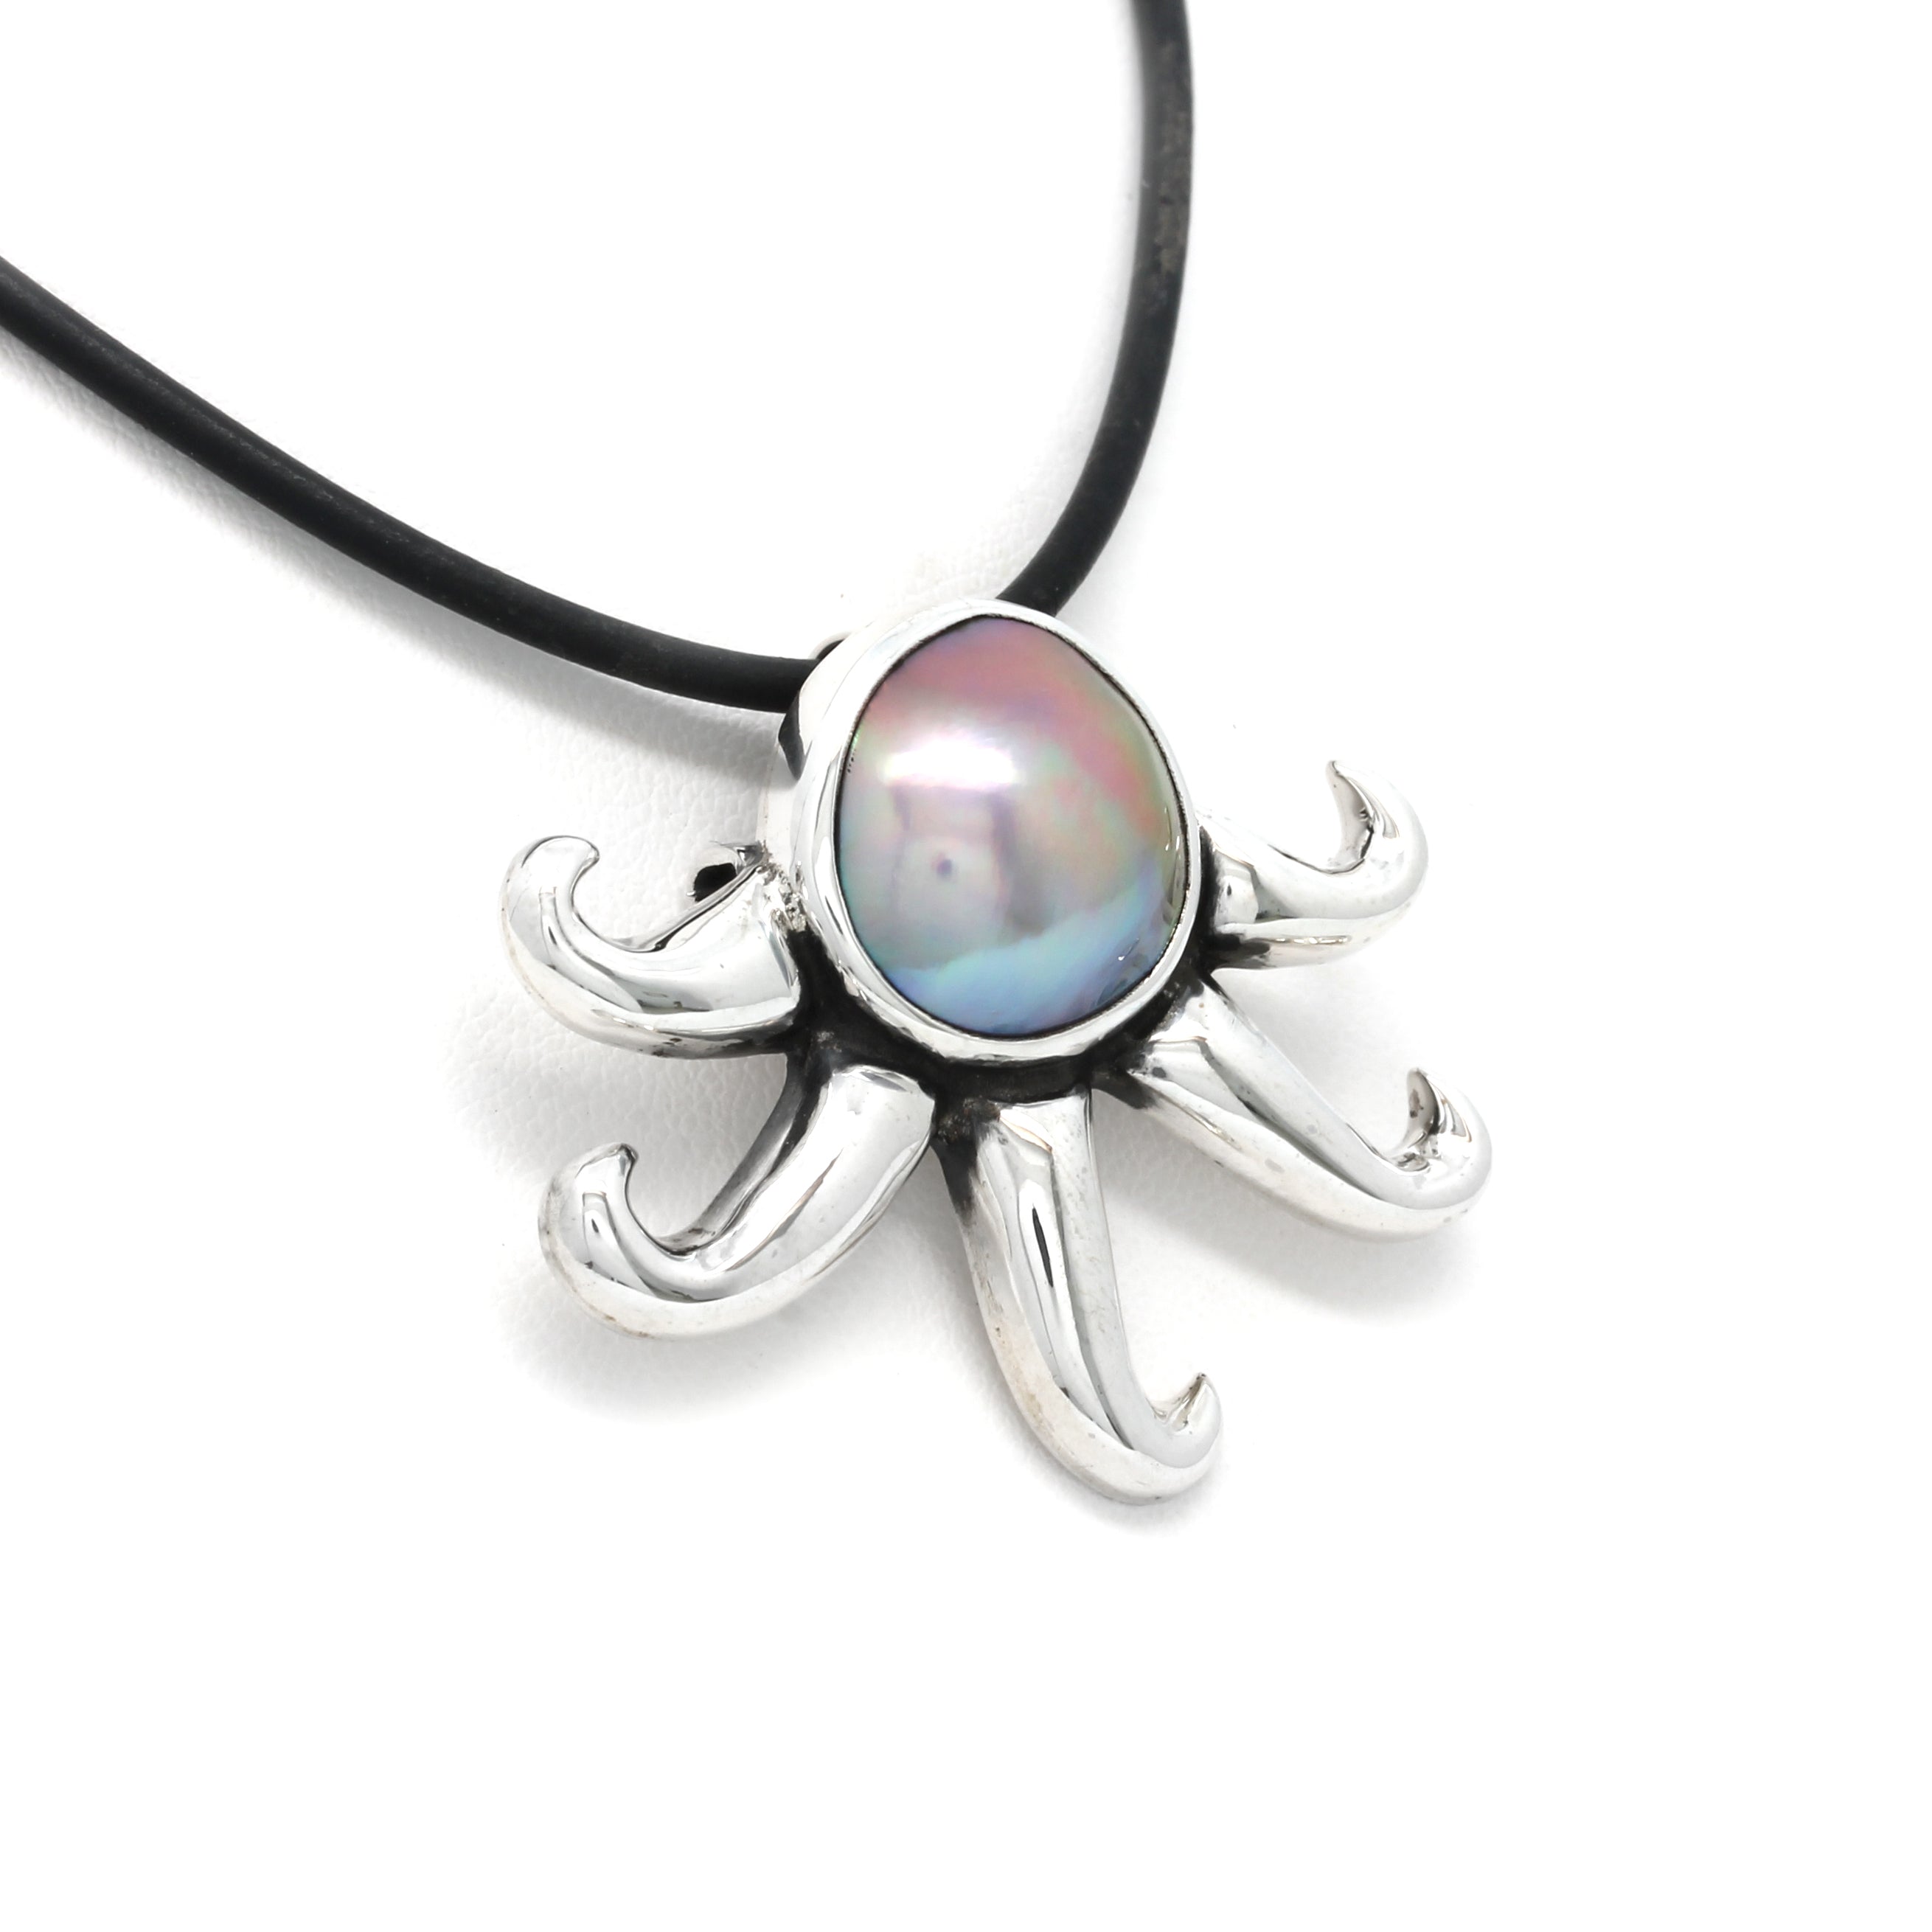 "Octopus" Silver Brooch/Pendant with Cortez Pearl by Priscila Canales